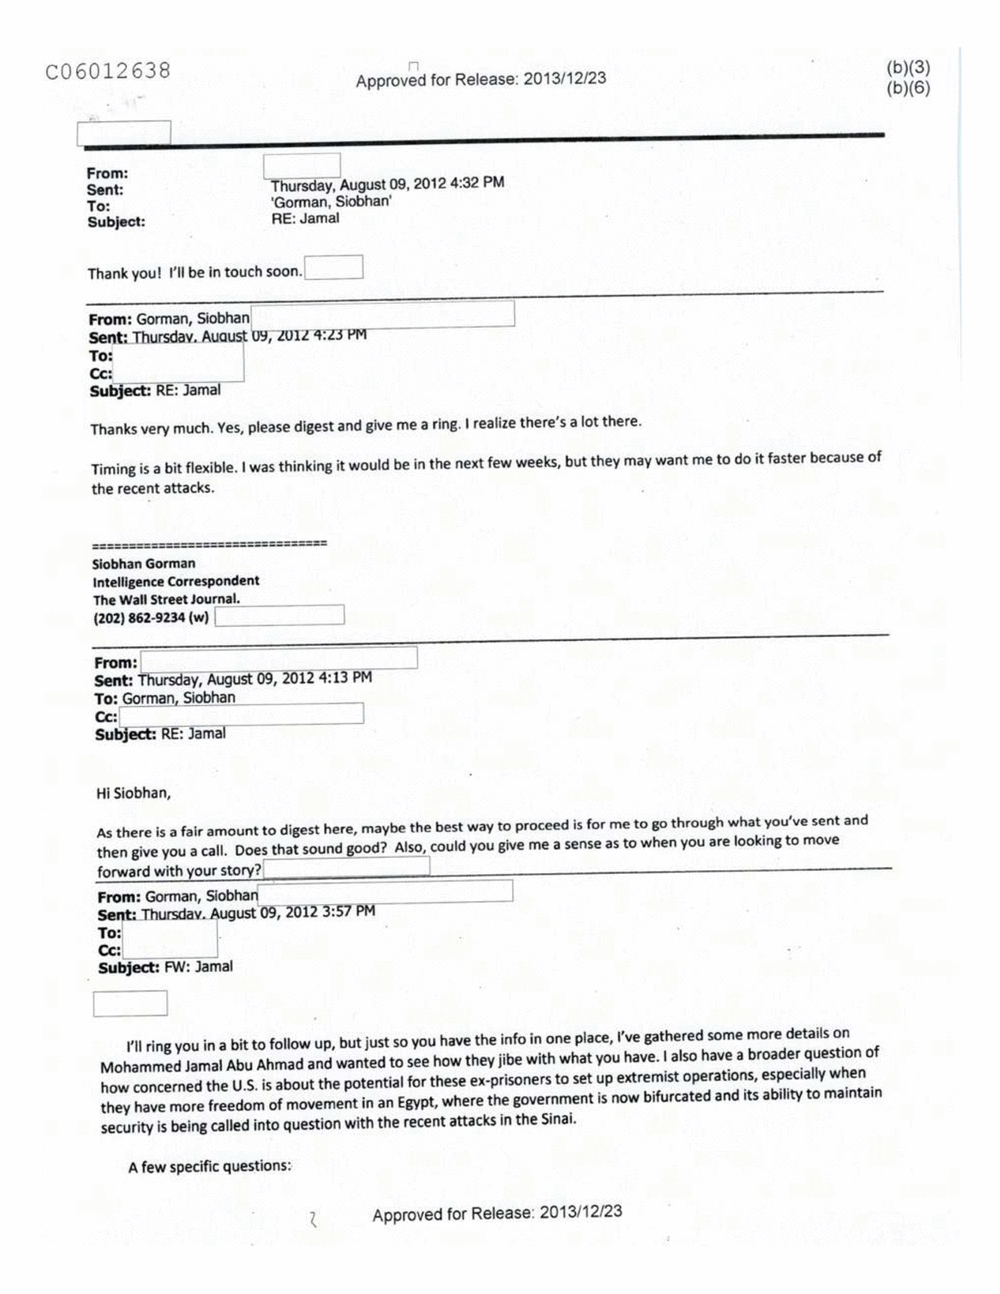 Page 202 from Email Correspondence Between Reporters and CIA Flacks